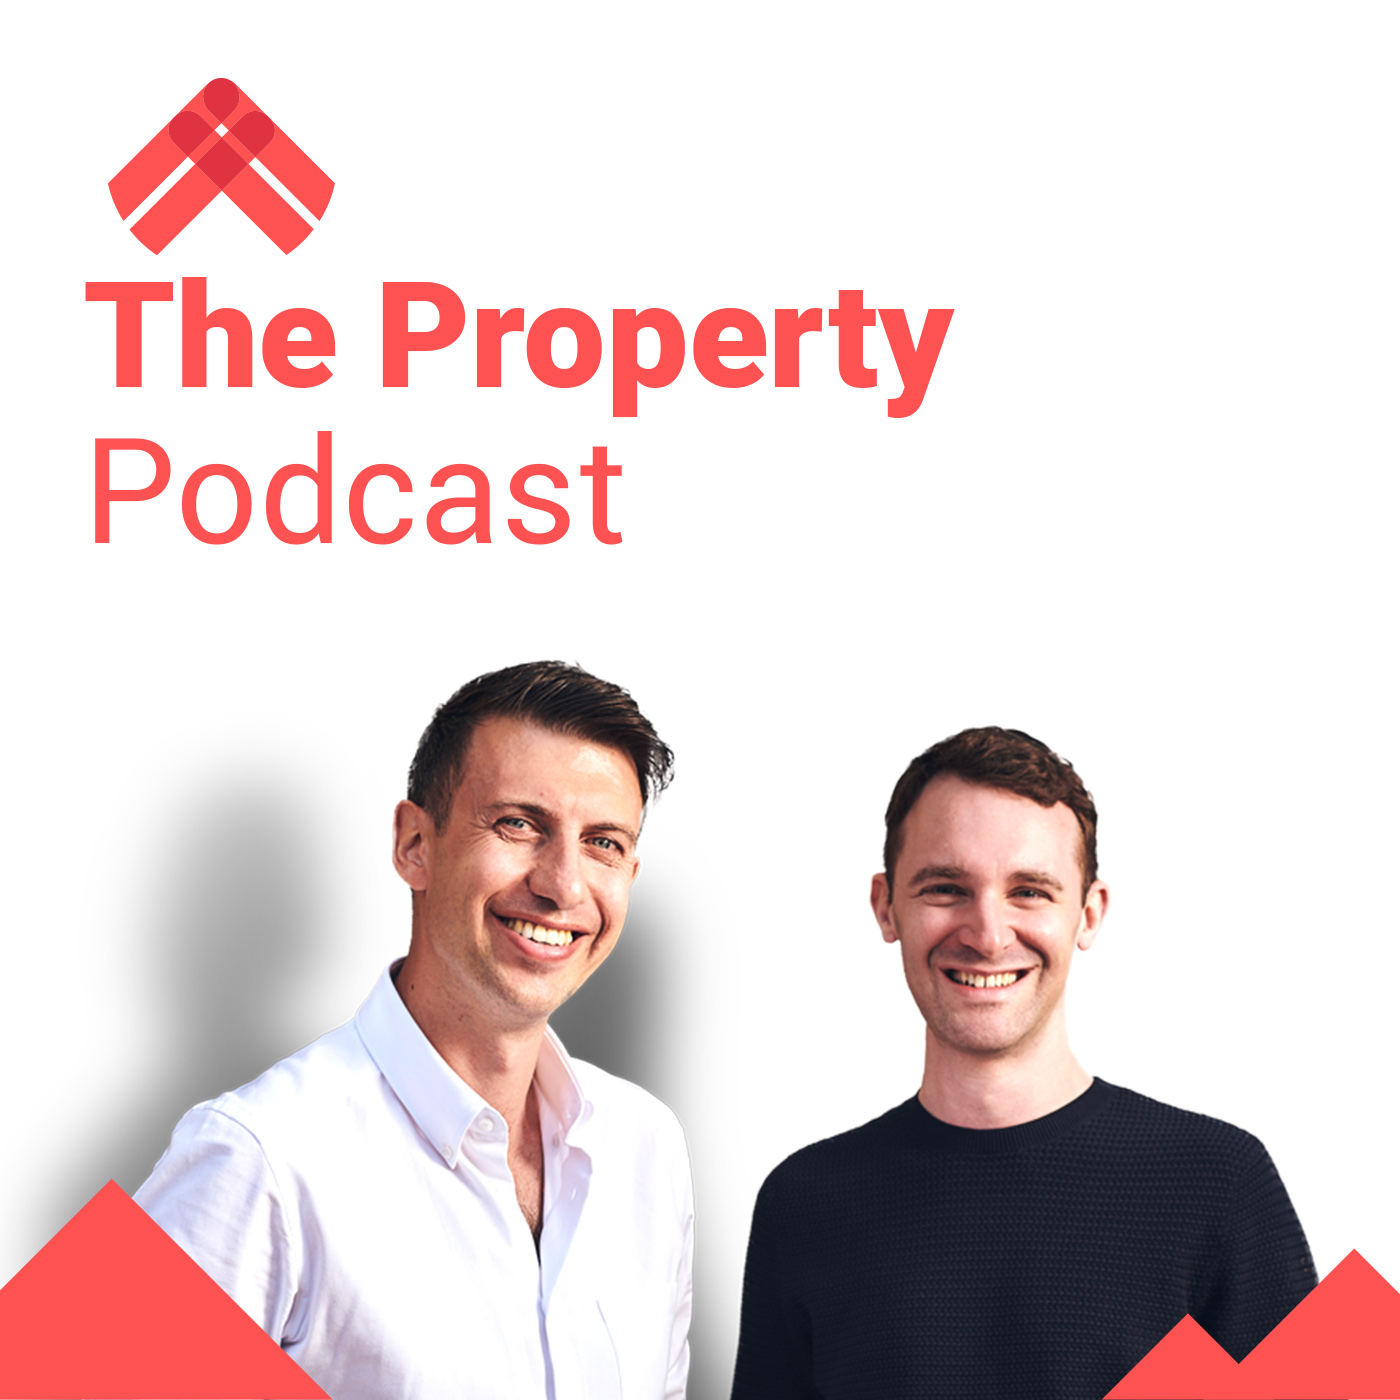 The Property Podcast On Apple Podcasts - the property podcast on apple podcasts